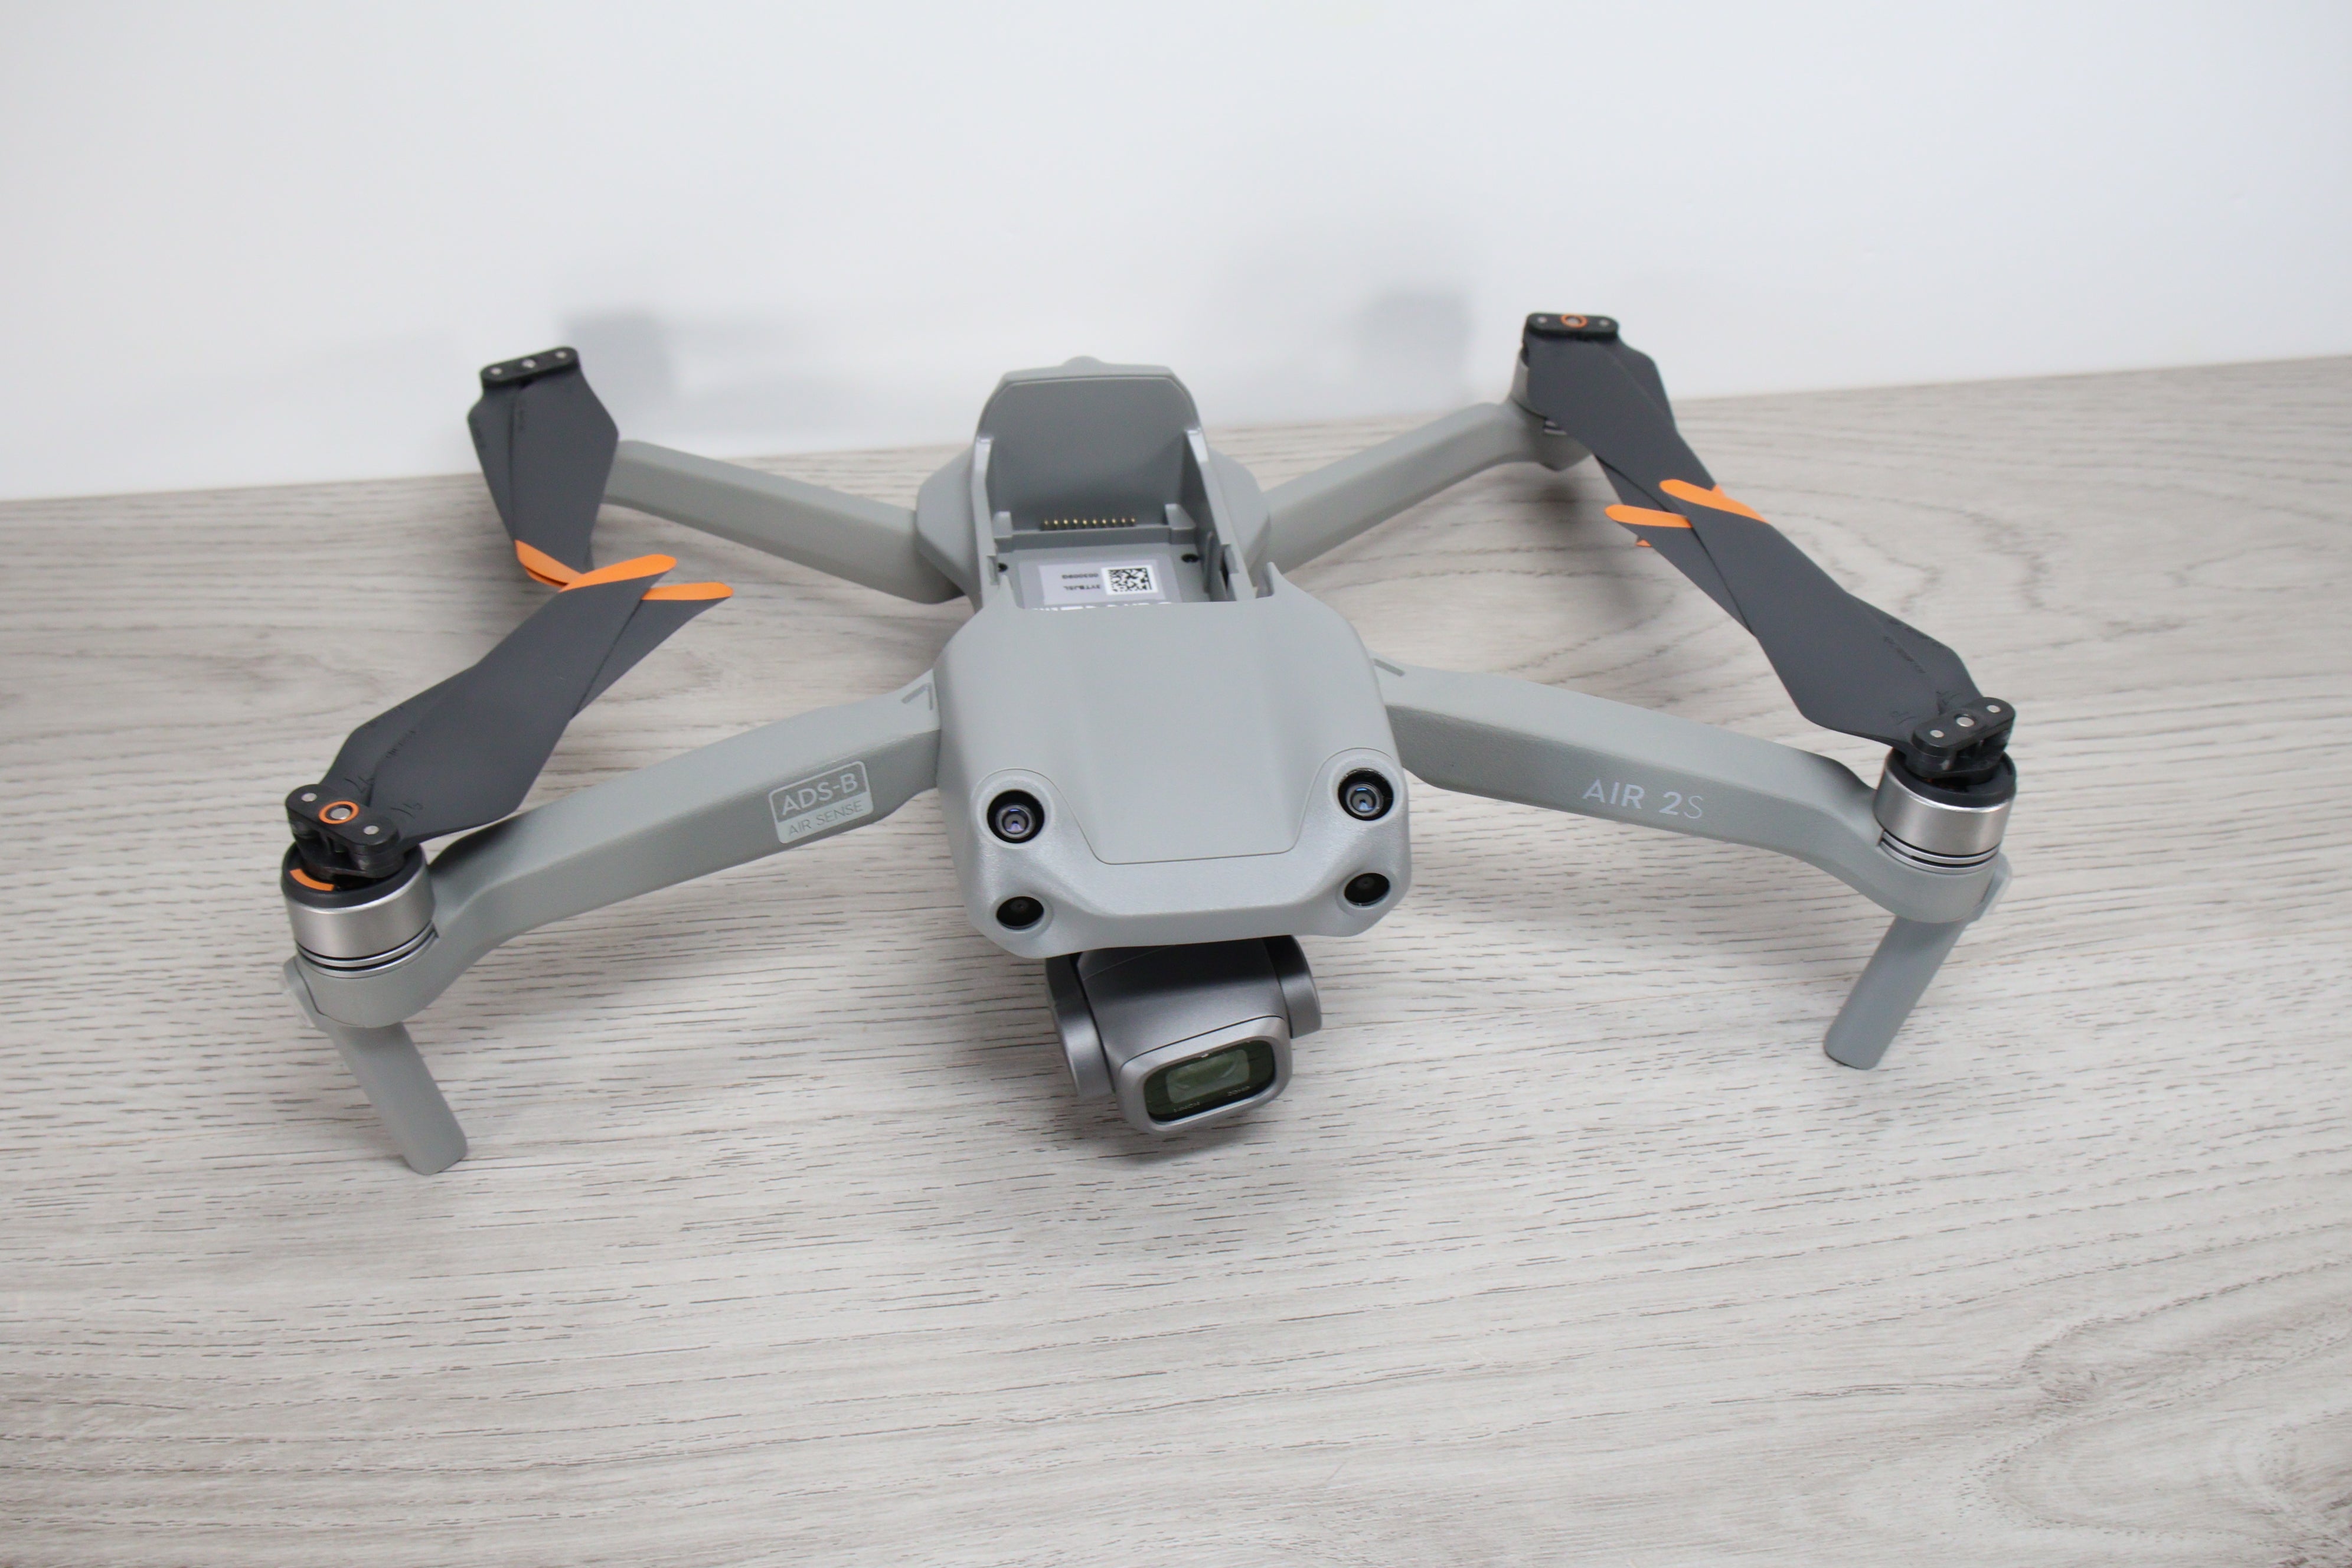 DJI Air 2s - drone only – The Drone Hangar